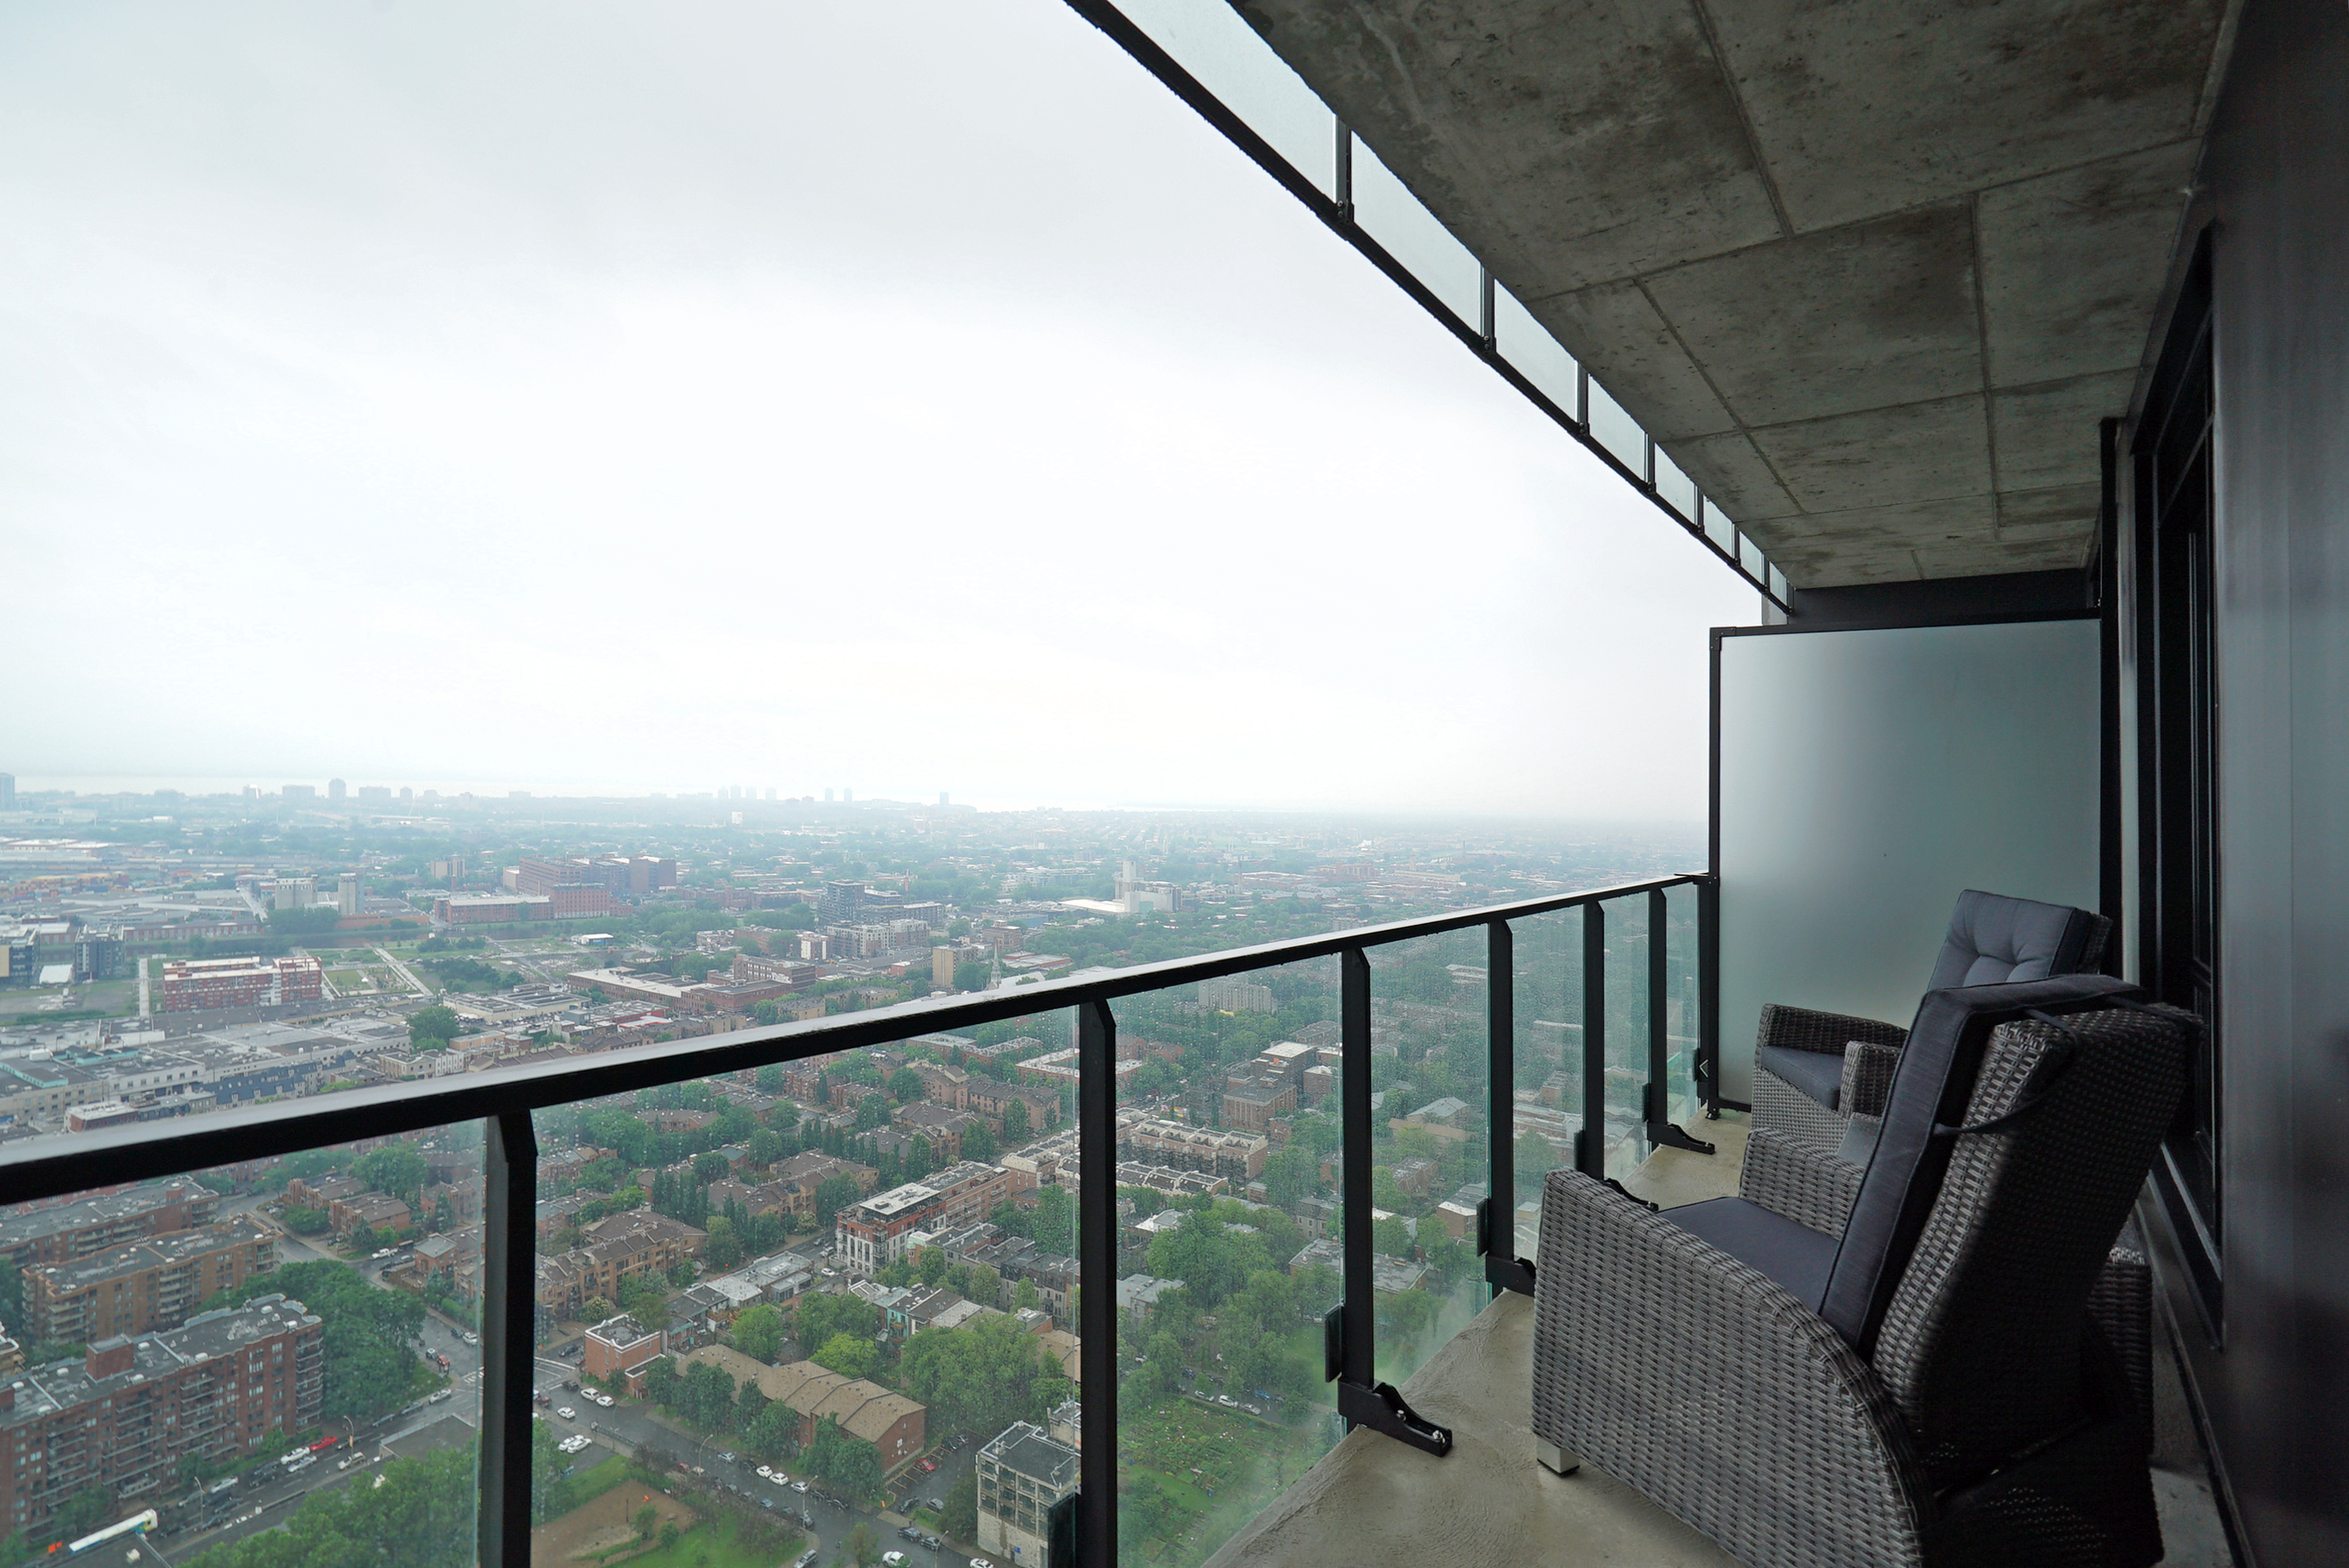 View from the balcony overlooking the magnificent city of montreal. Balcony has a glass railing, dark gray designer outdoor chairs and a glass table. Amazing space from this furnished apartment for rent in montreal